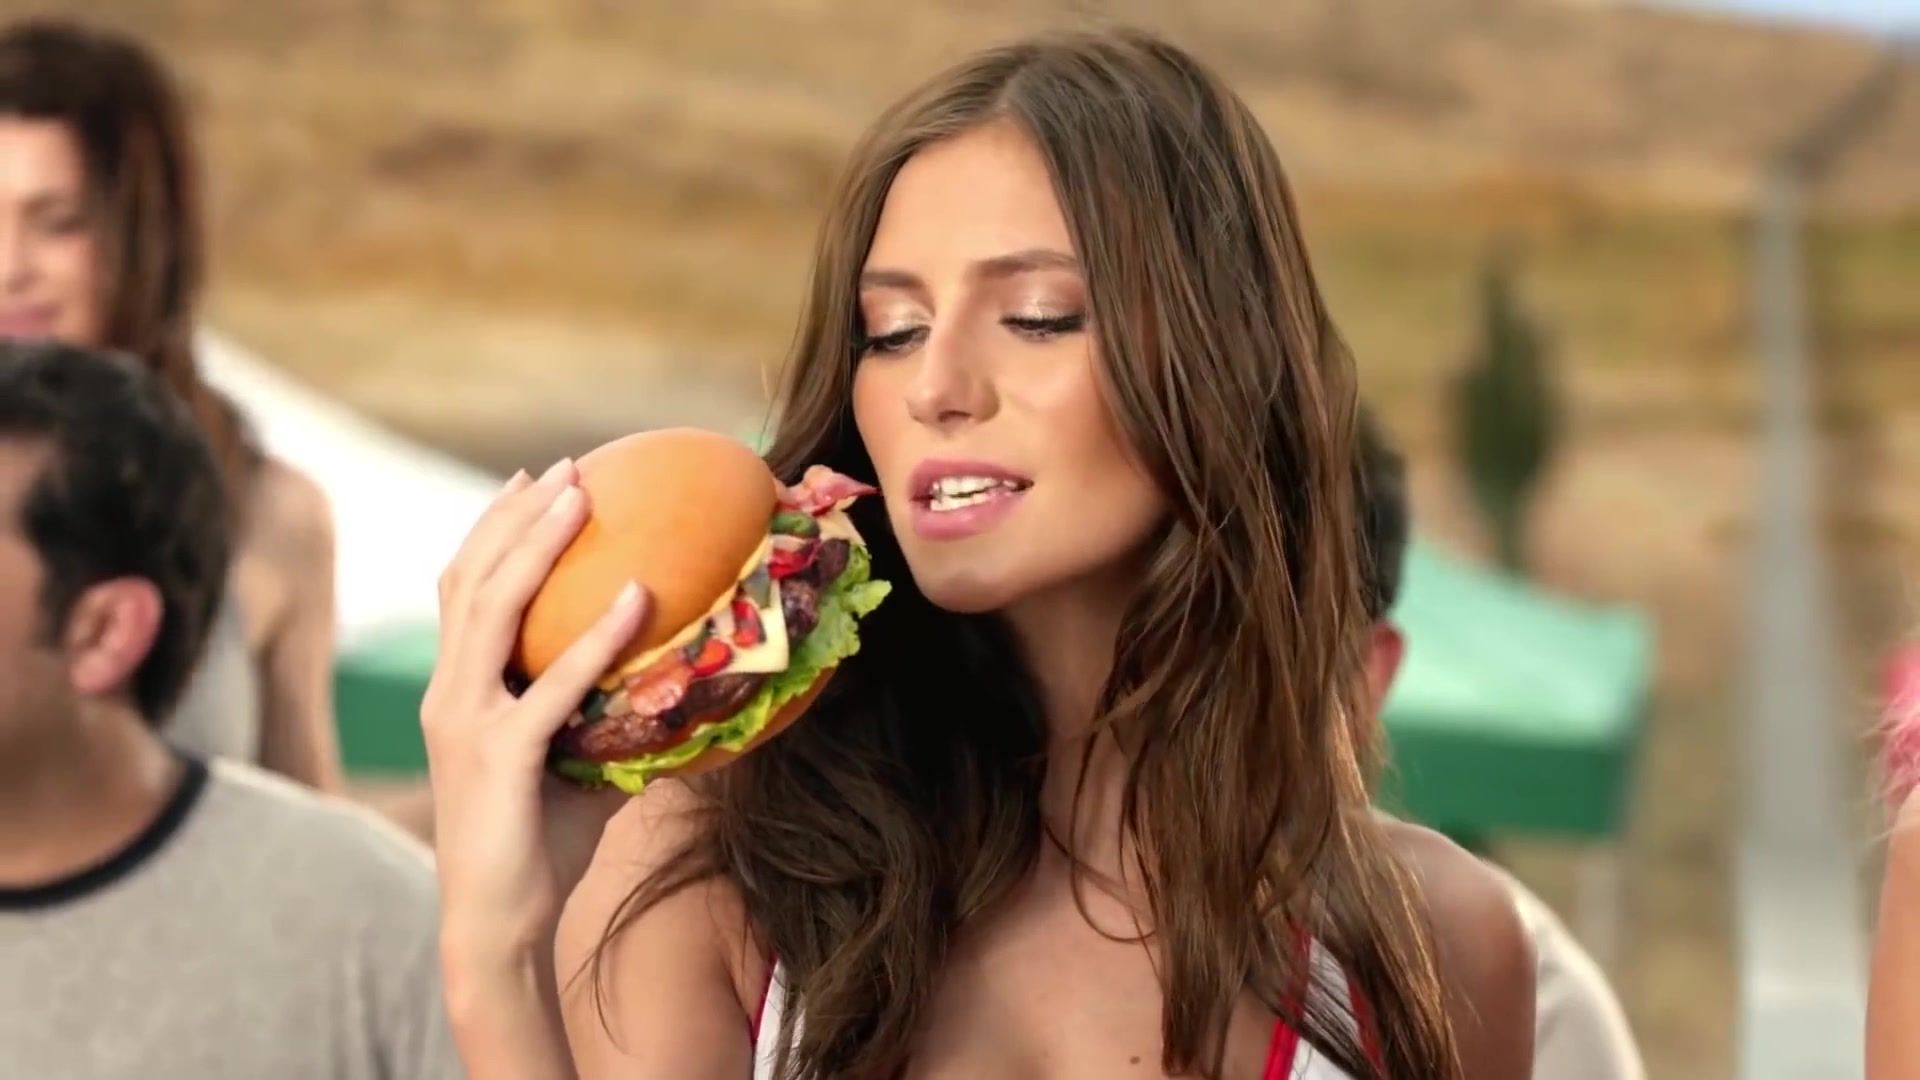 POV Sexiest Girls of Fast food Commercials - Charlotte McKinney Kate Upton Emily Rat. Tera Patrick